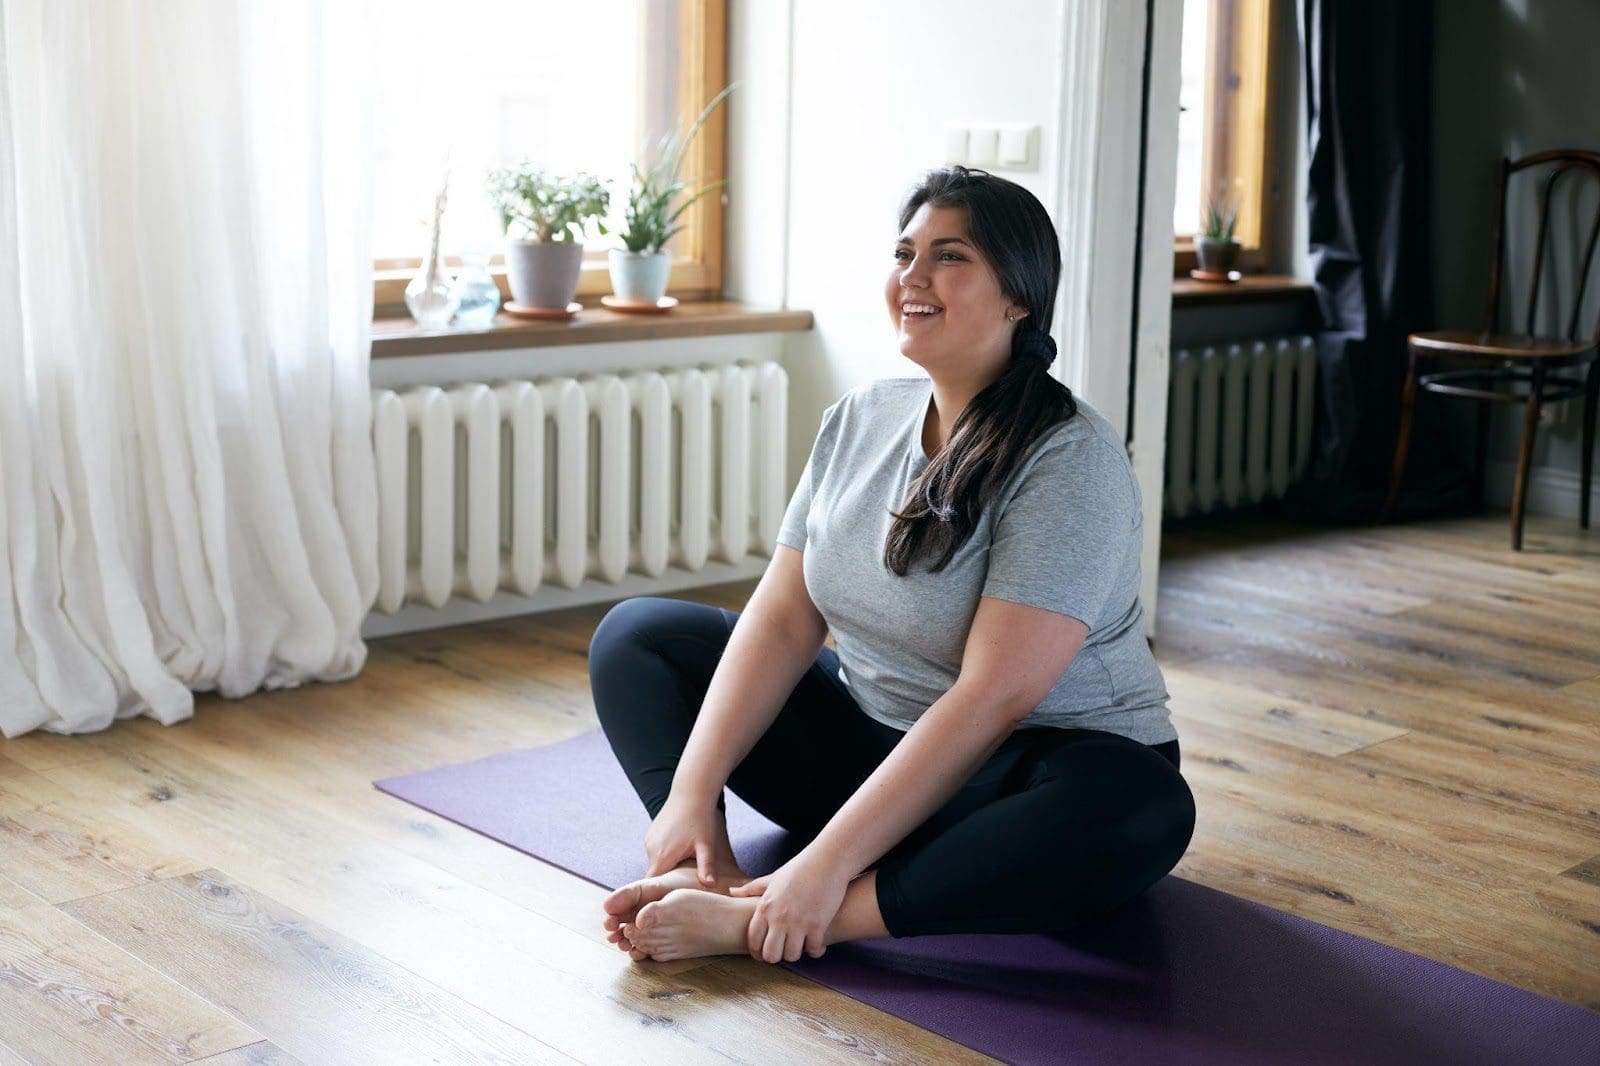 Young woman sitting on exercise mat in living room.